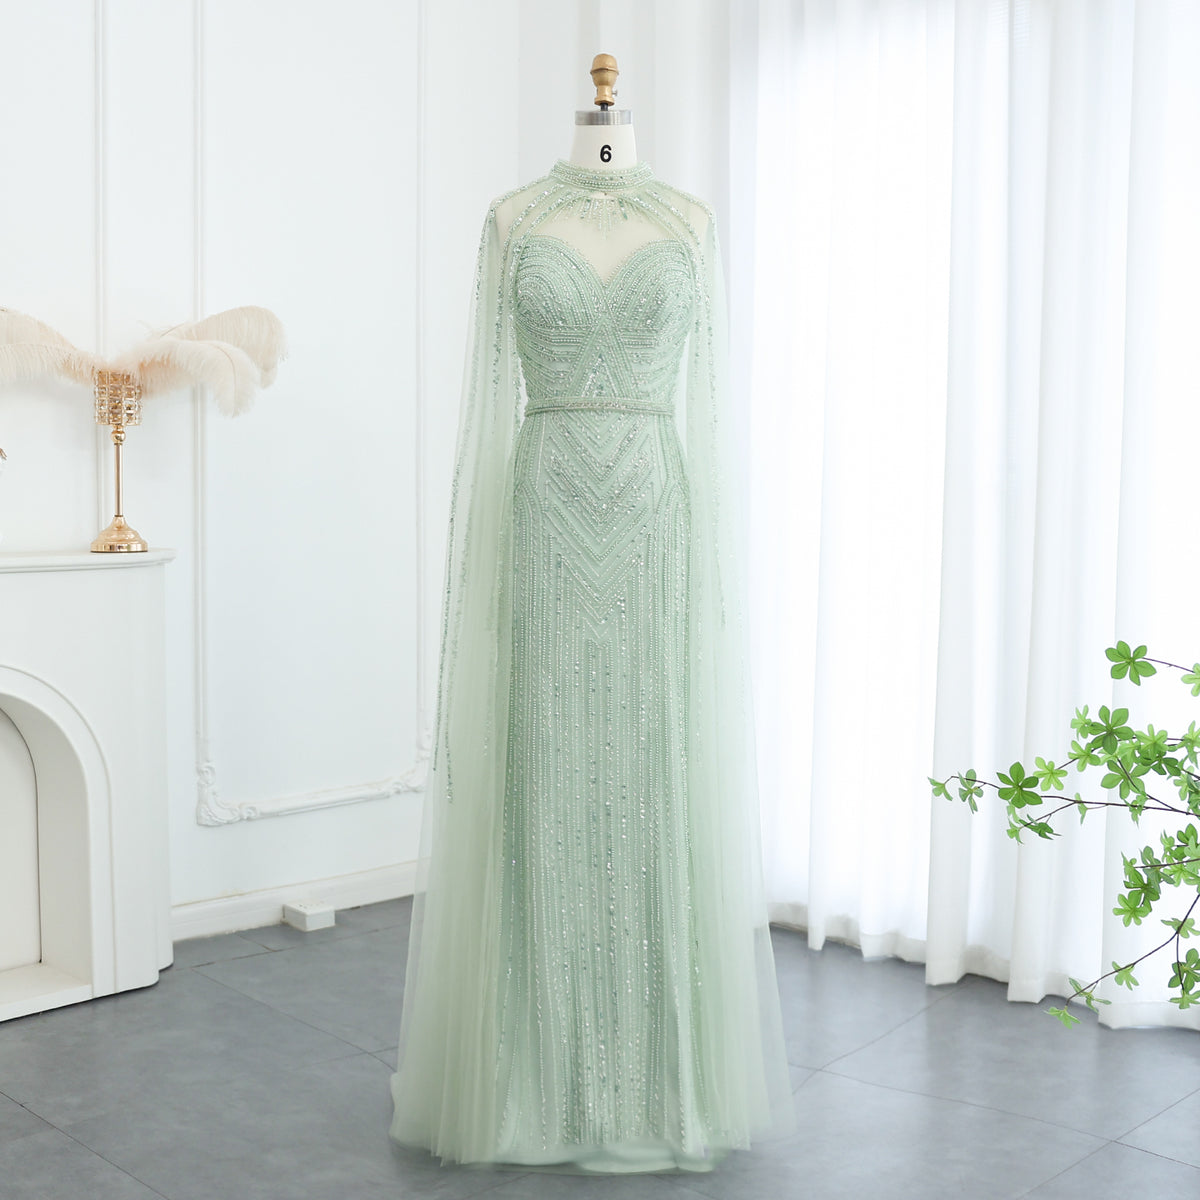 Sharon Said Luxury Nude Mermaid Evening Dress with Cape Sleeve High Neck Sage Green Arabic Women Long Wedding Party Gowns SS164